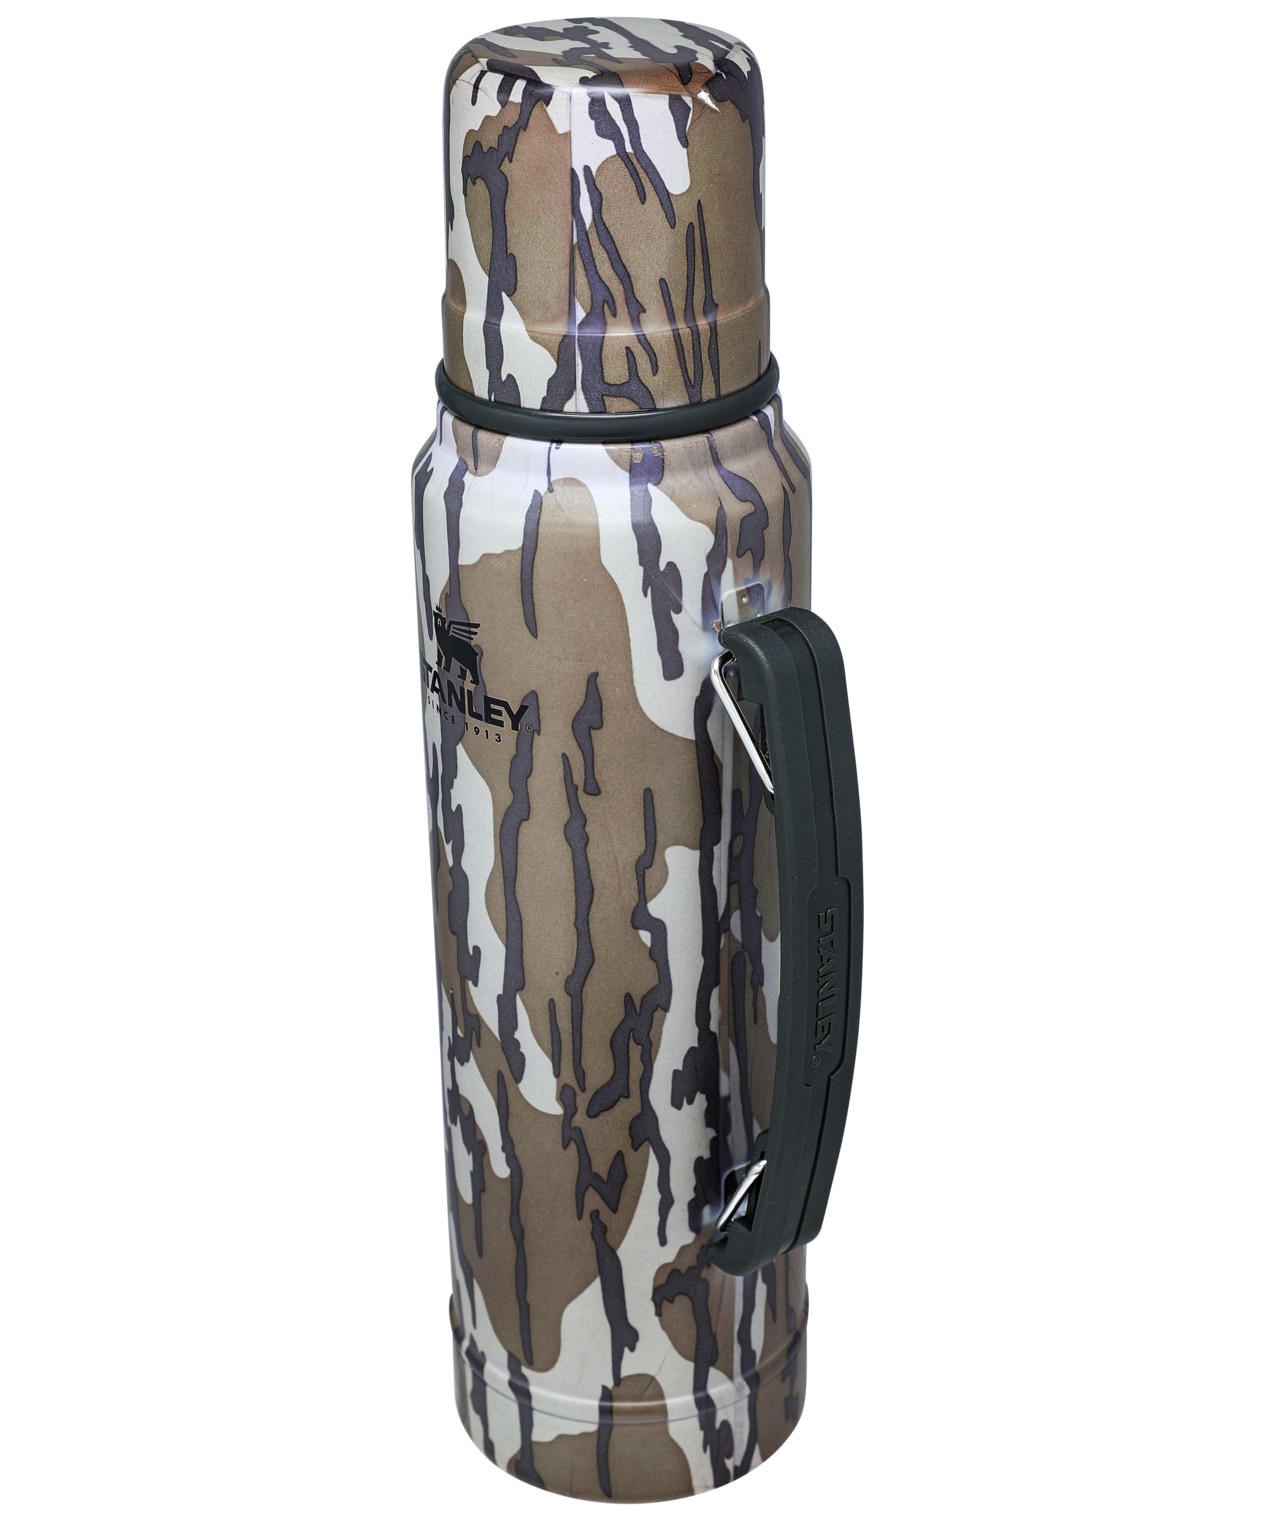 NEW STANLEY /ALADDIN CAMOUFLAGE THERMOS BOTTLE 1 QT.